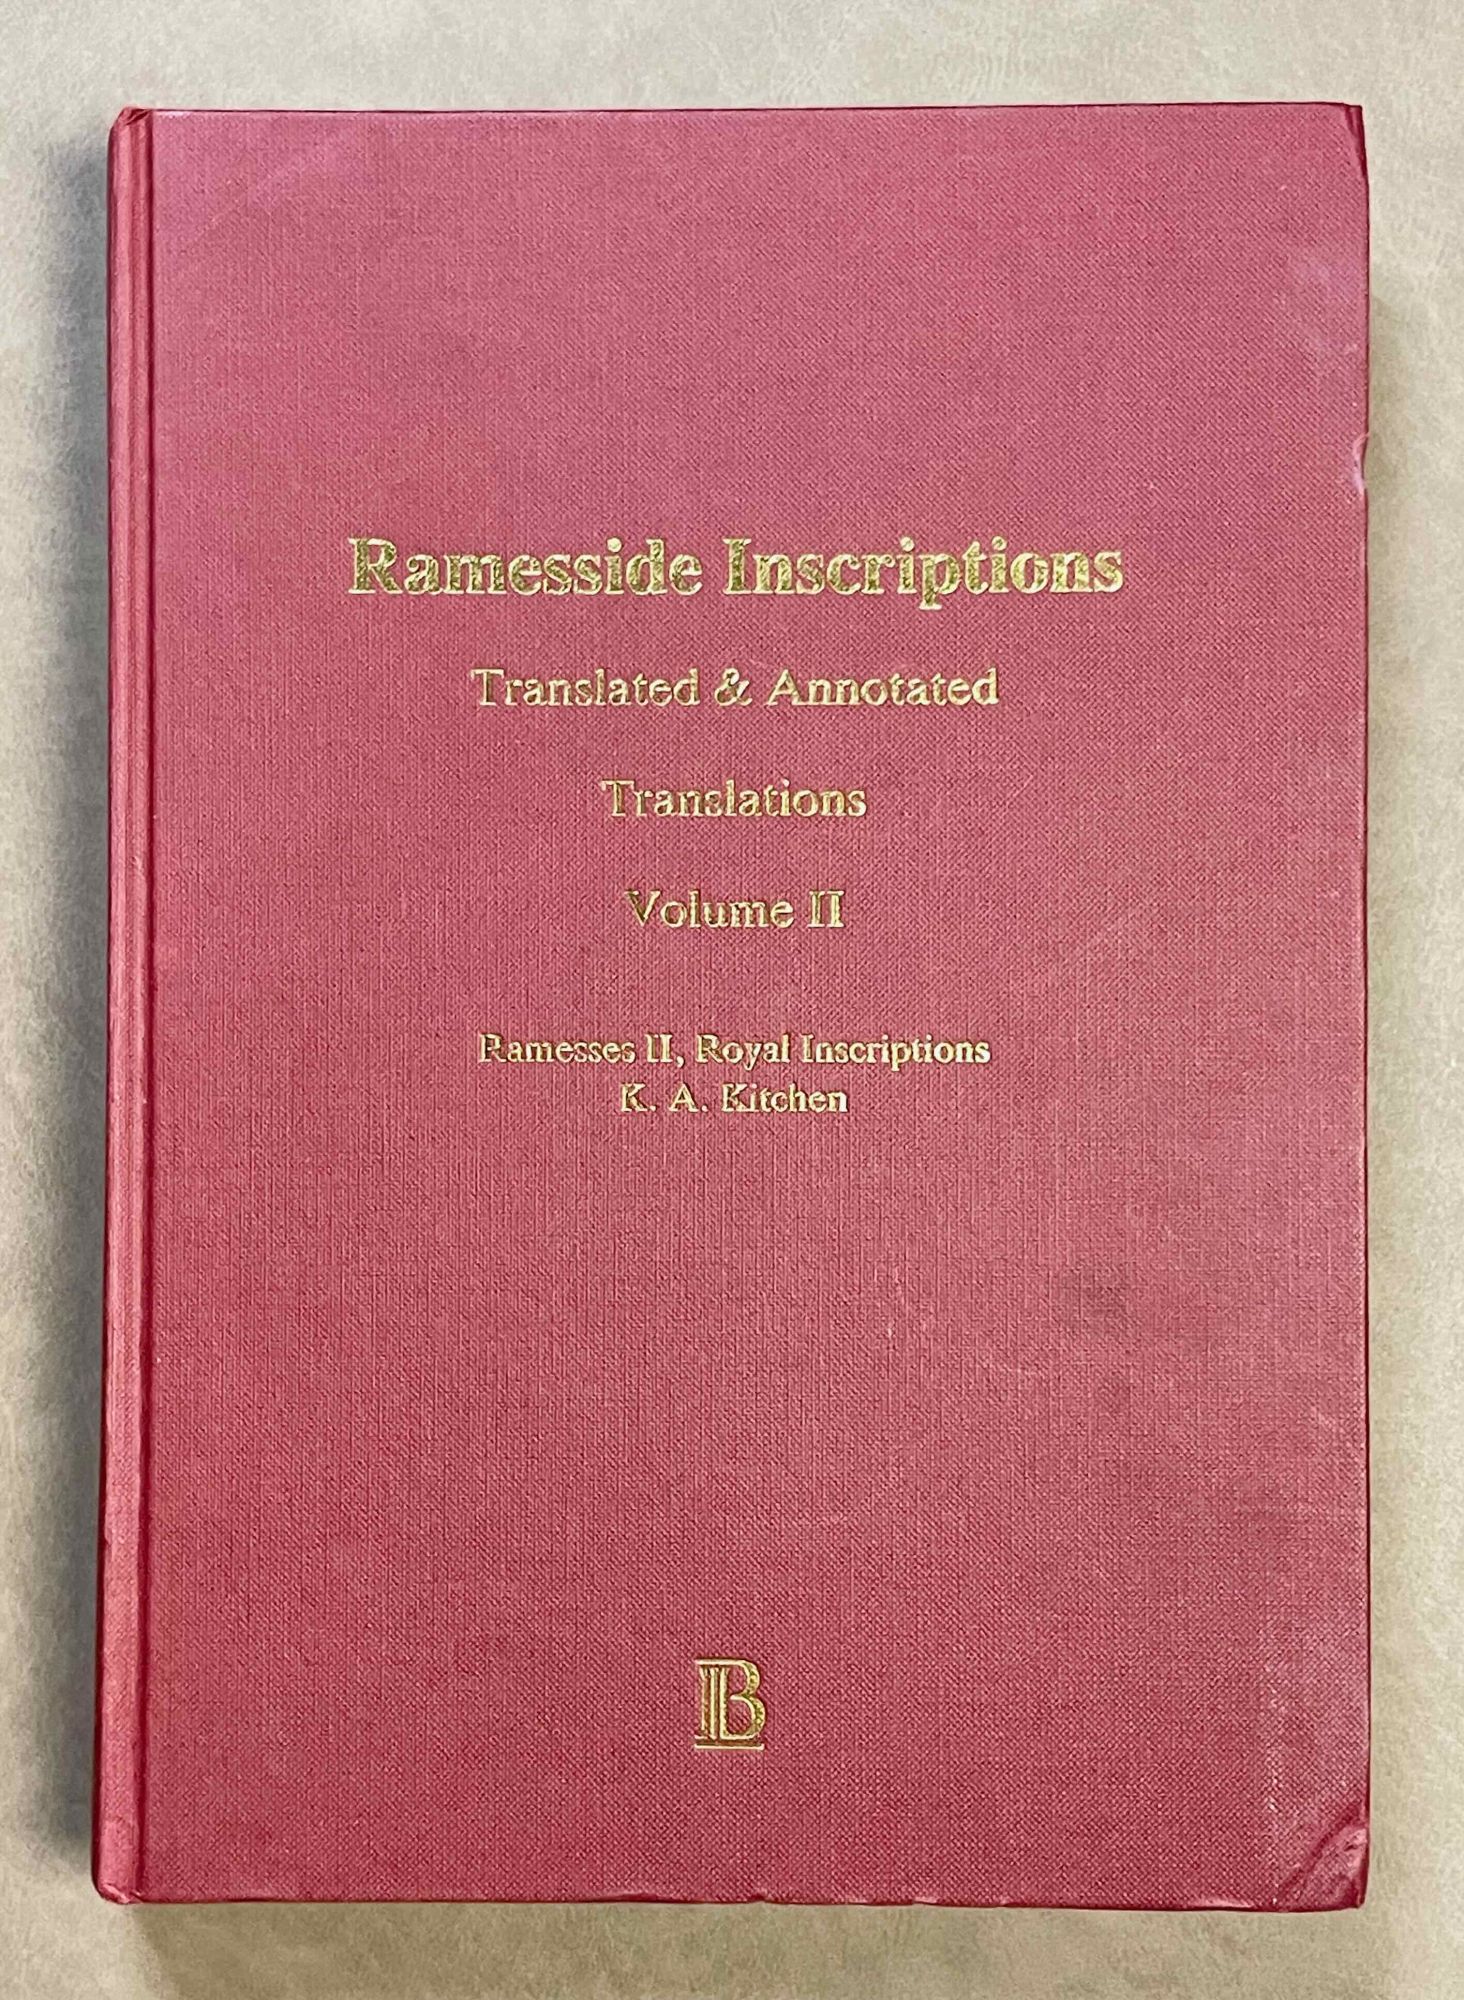 Ramesside inscriptions. Translated and annotated. Translations. Vol. II: Ramesses II, Royal Inscriptions - KITCHEN Kenneth Anderson